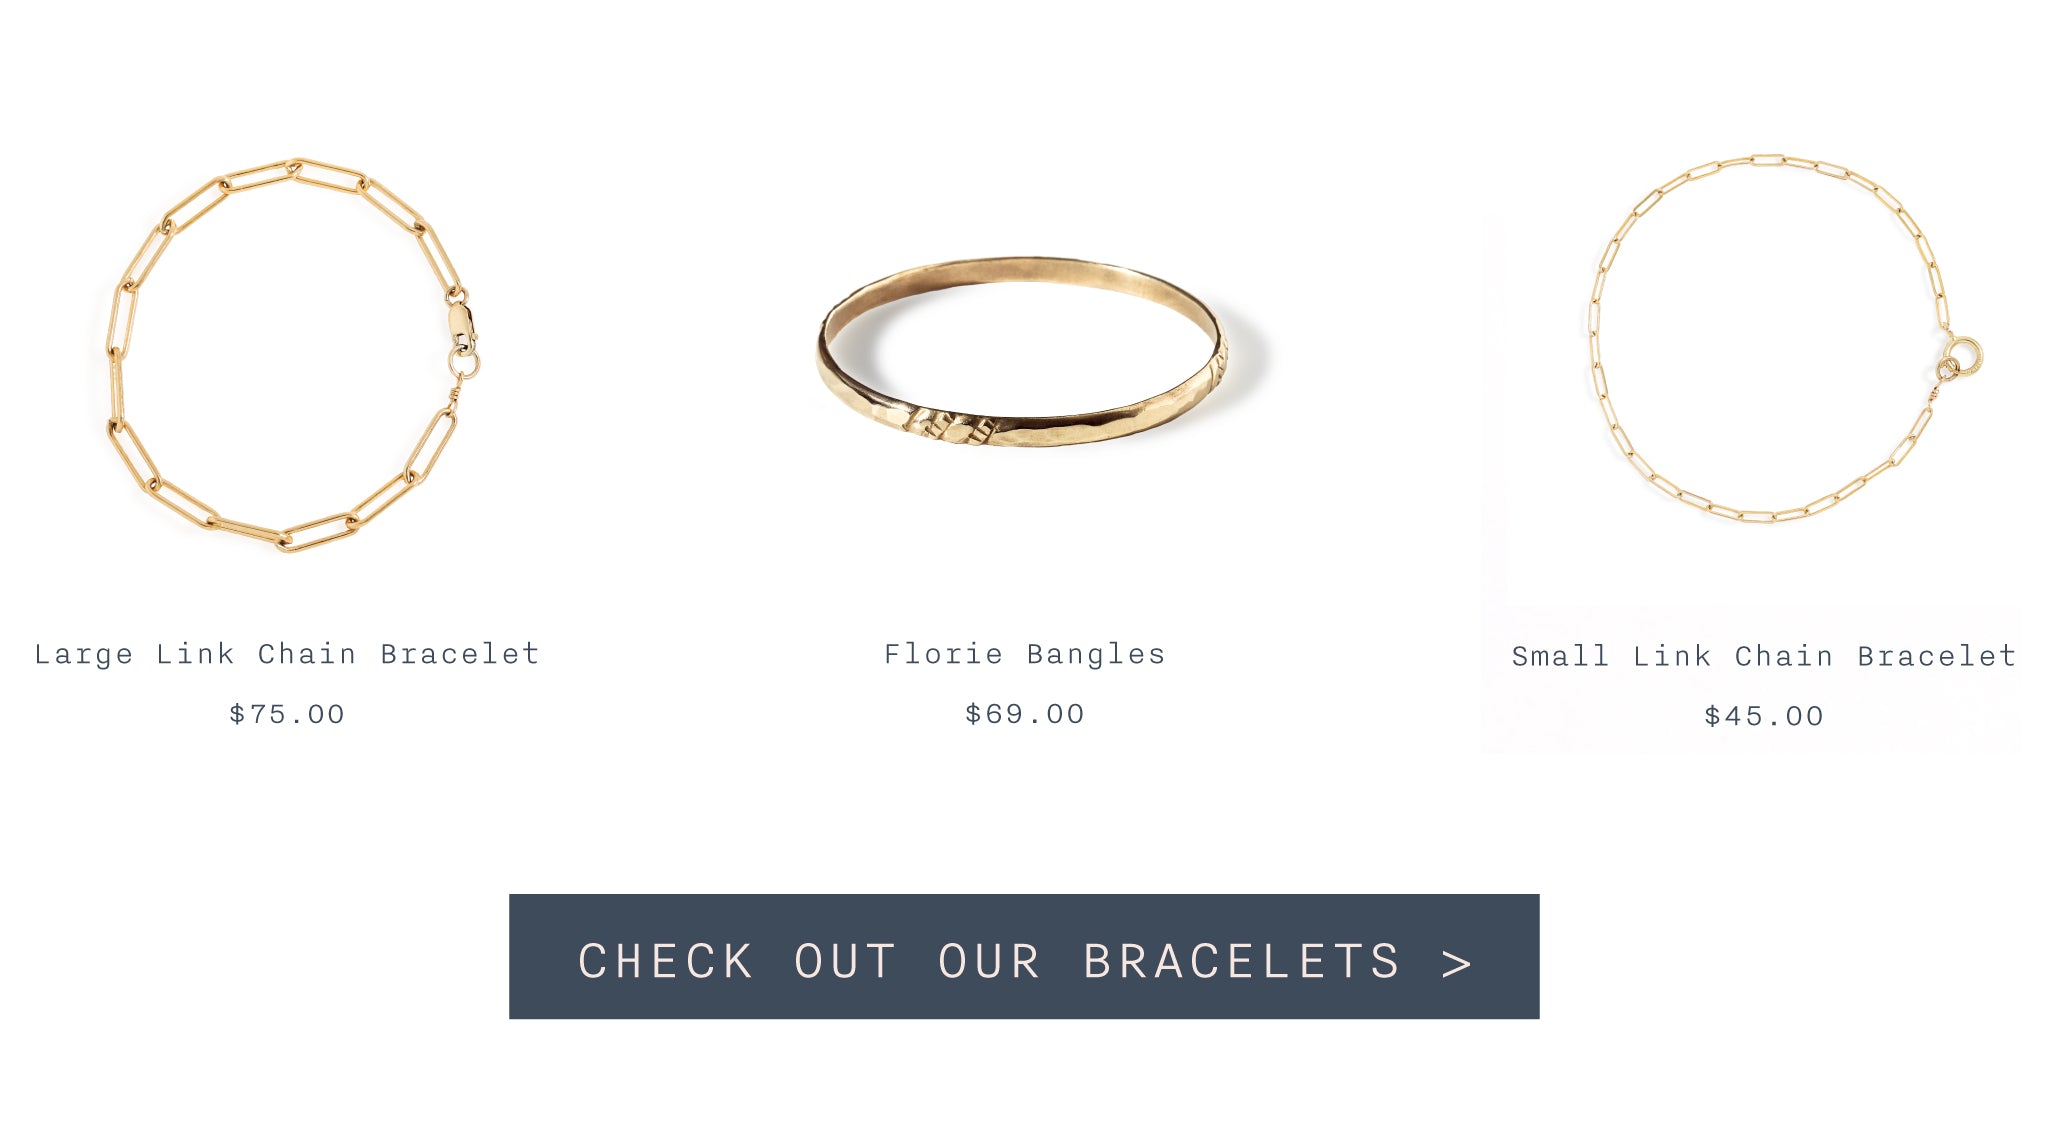 Follow These Easy Steps at Home to Find Your Bracelet Size – Delia